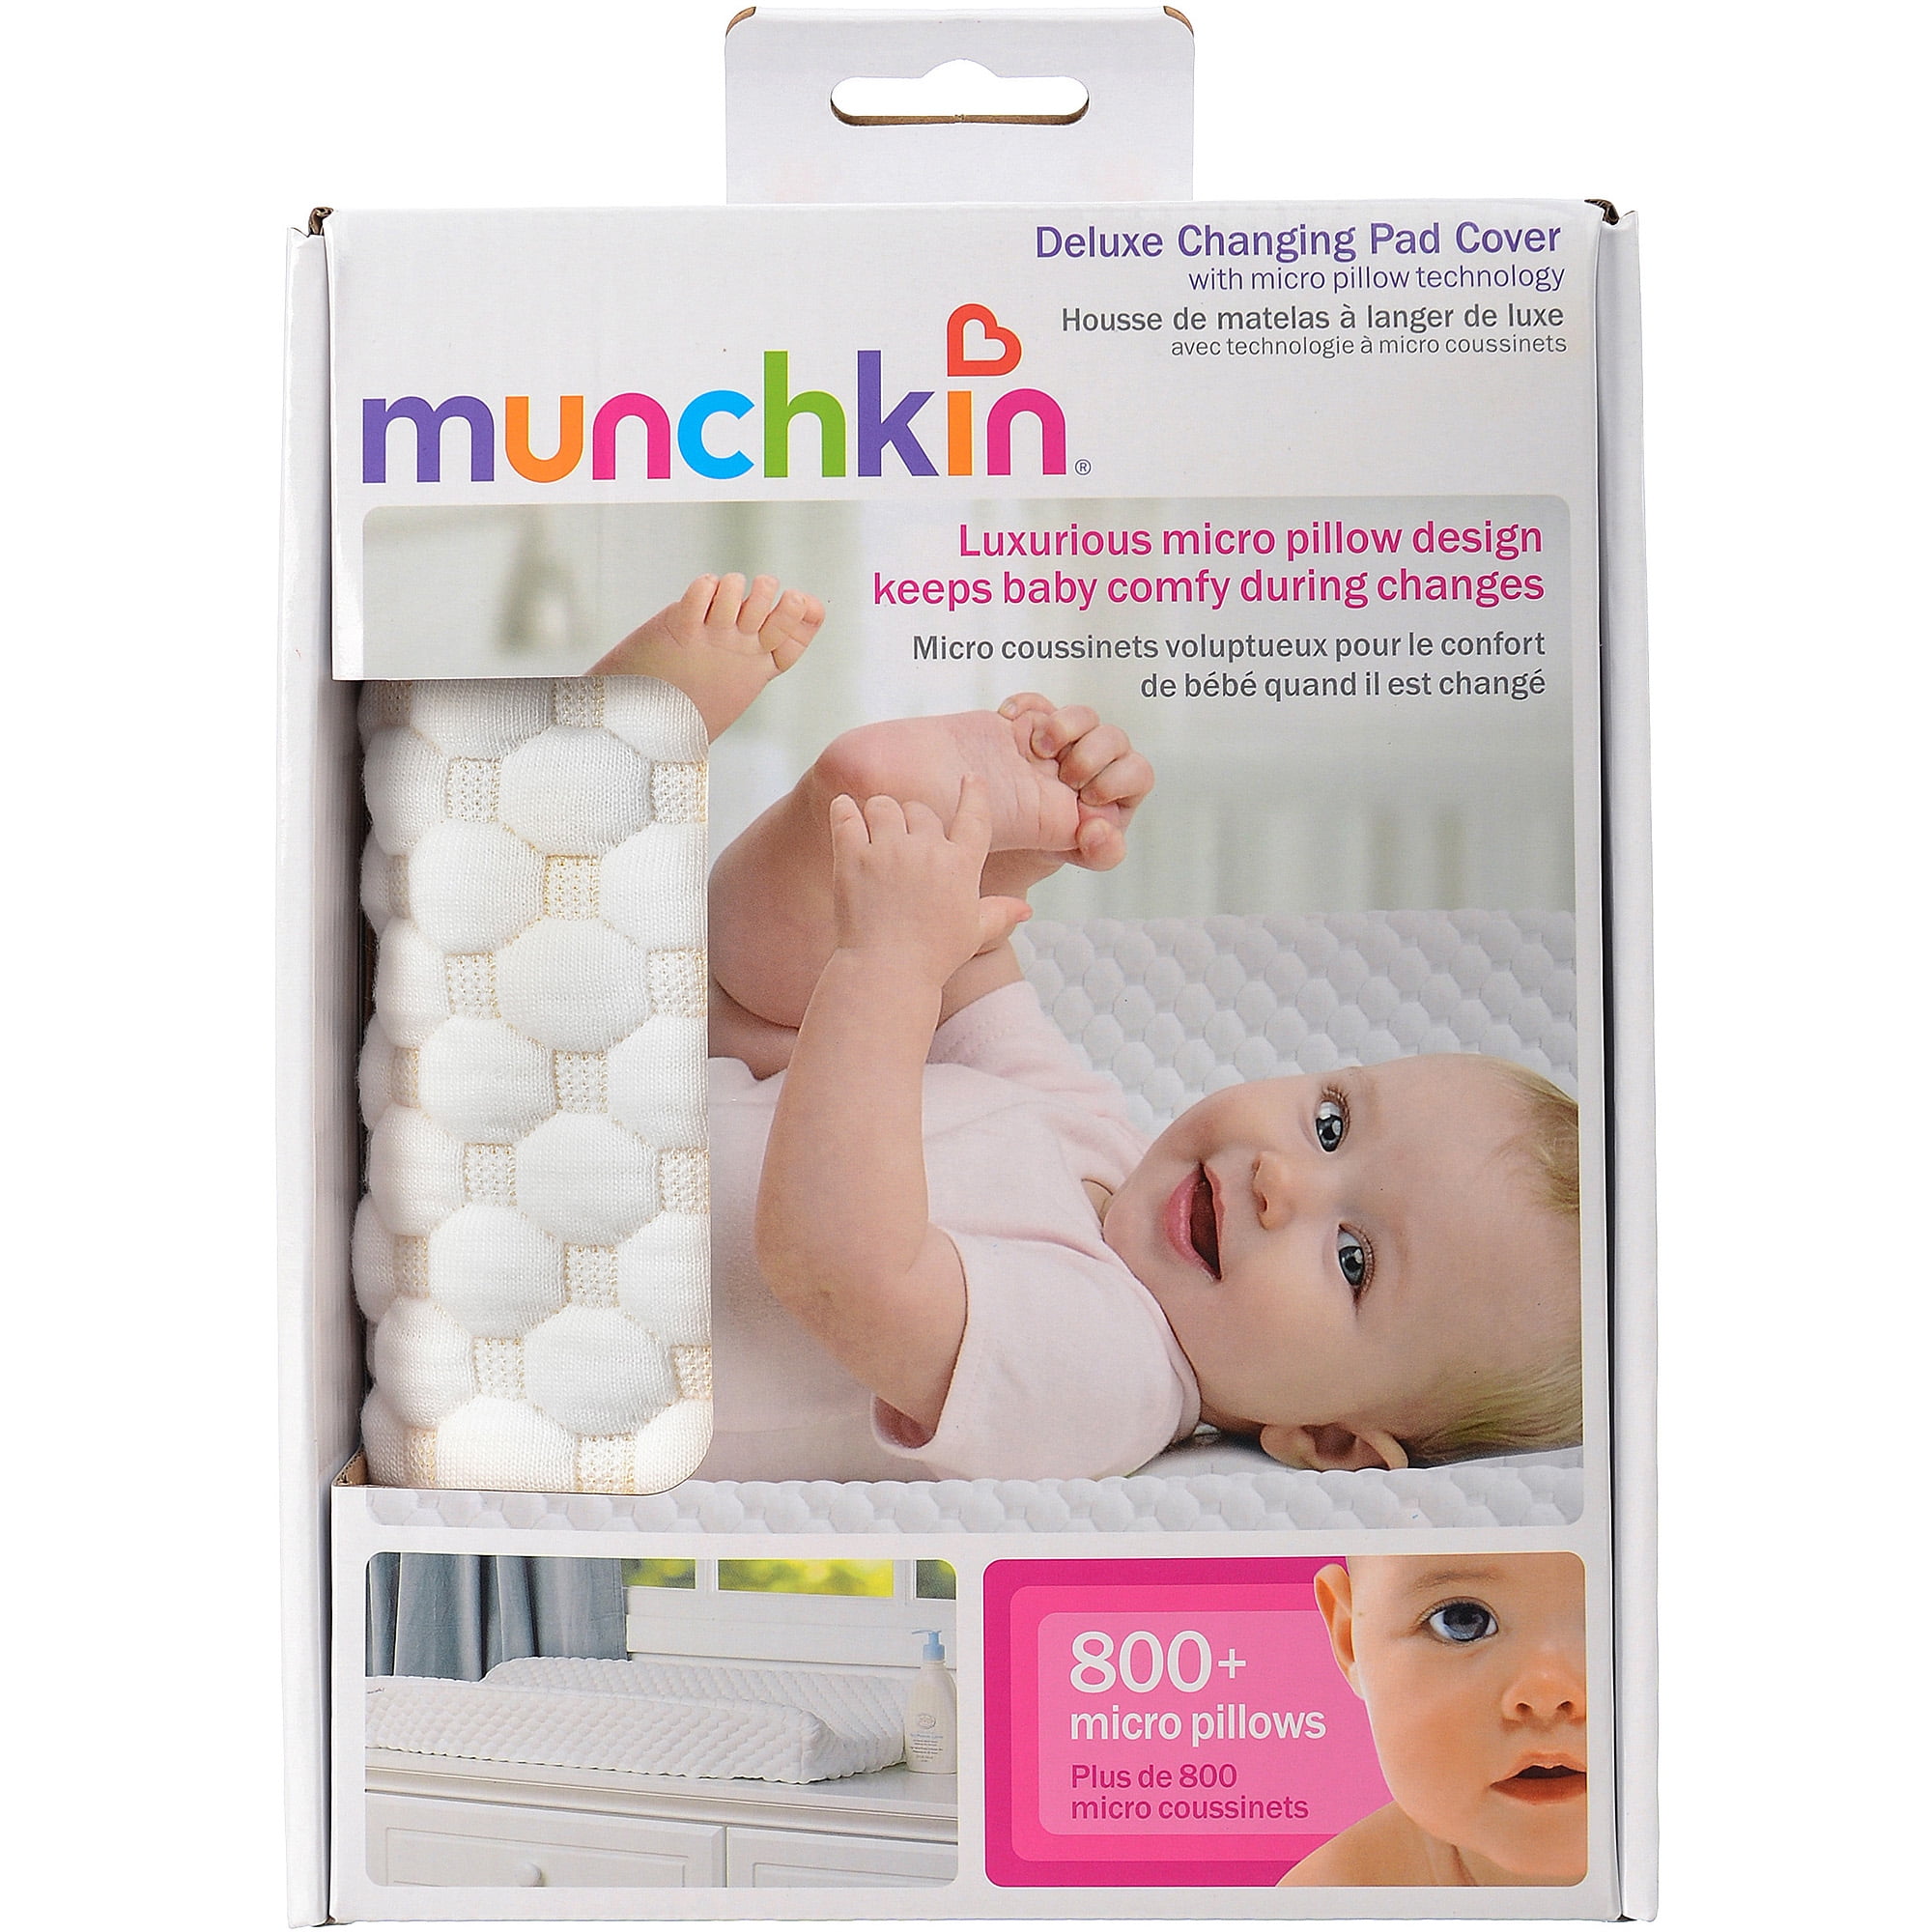 Munchkin Deluxe Changing Pad Cover with Micro-Pillow Technology ...